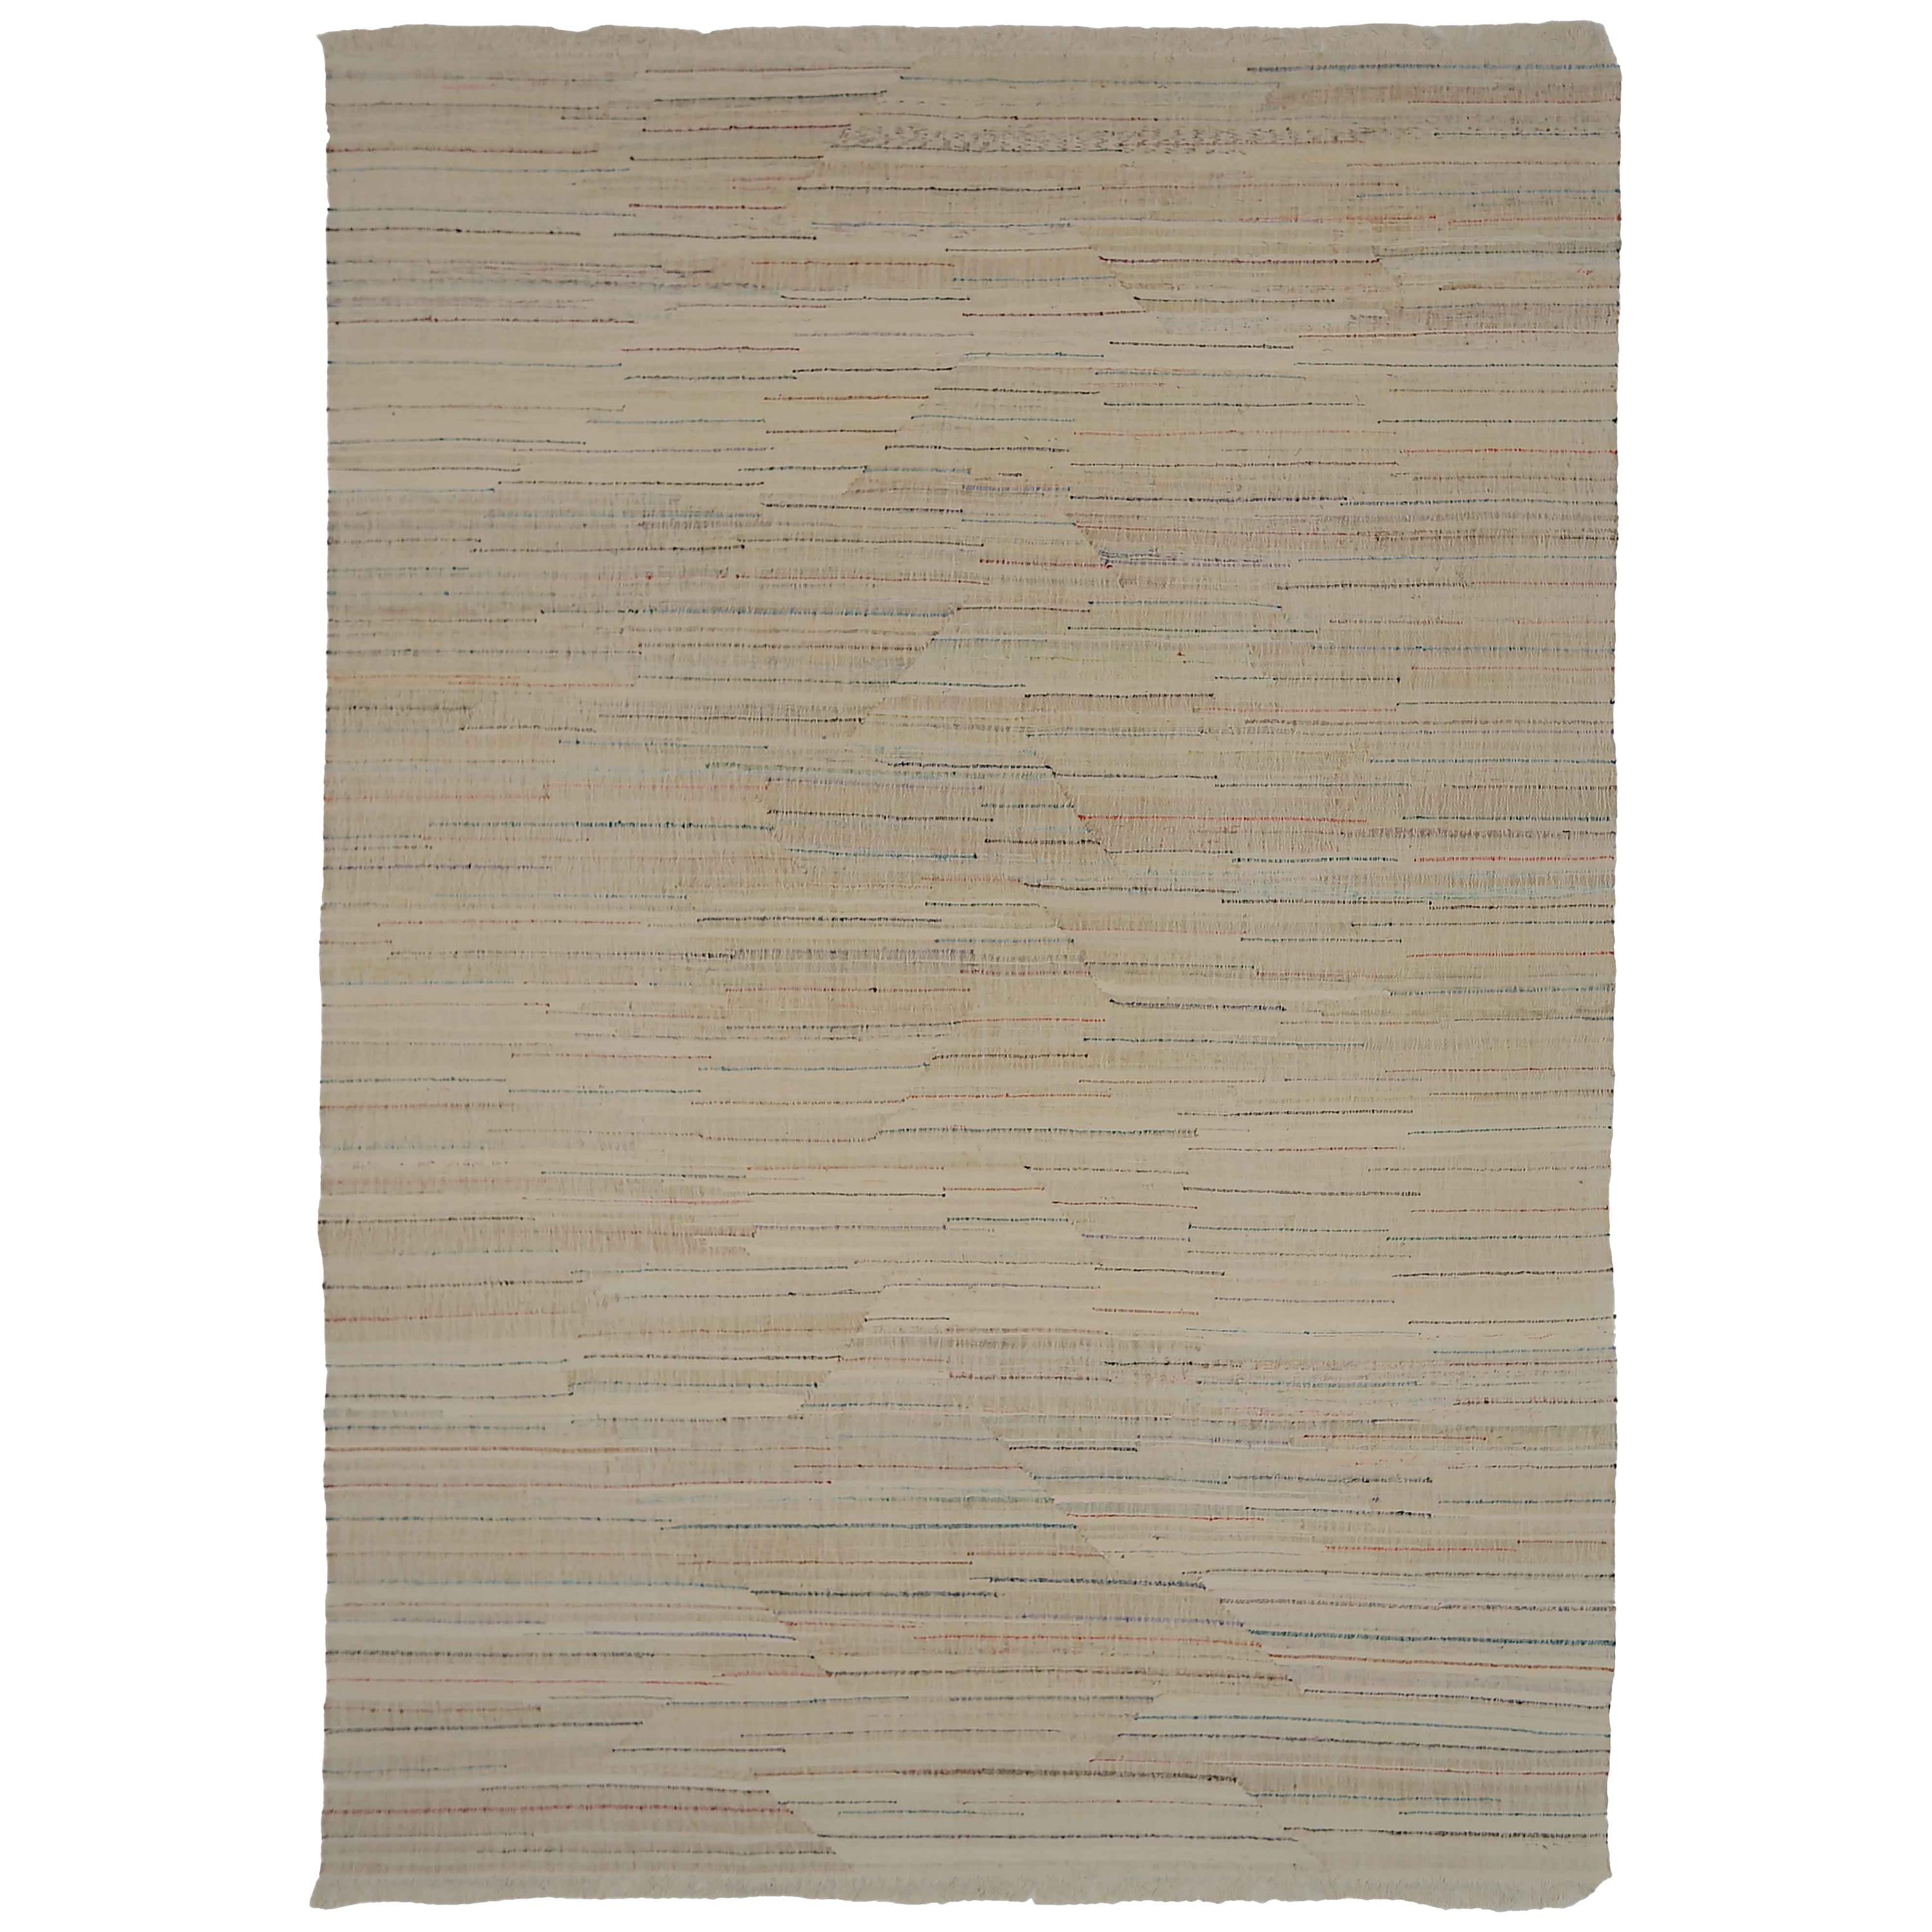 Modern Turkish Kilim Rug Made of Antique Wool with Colored Lines